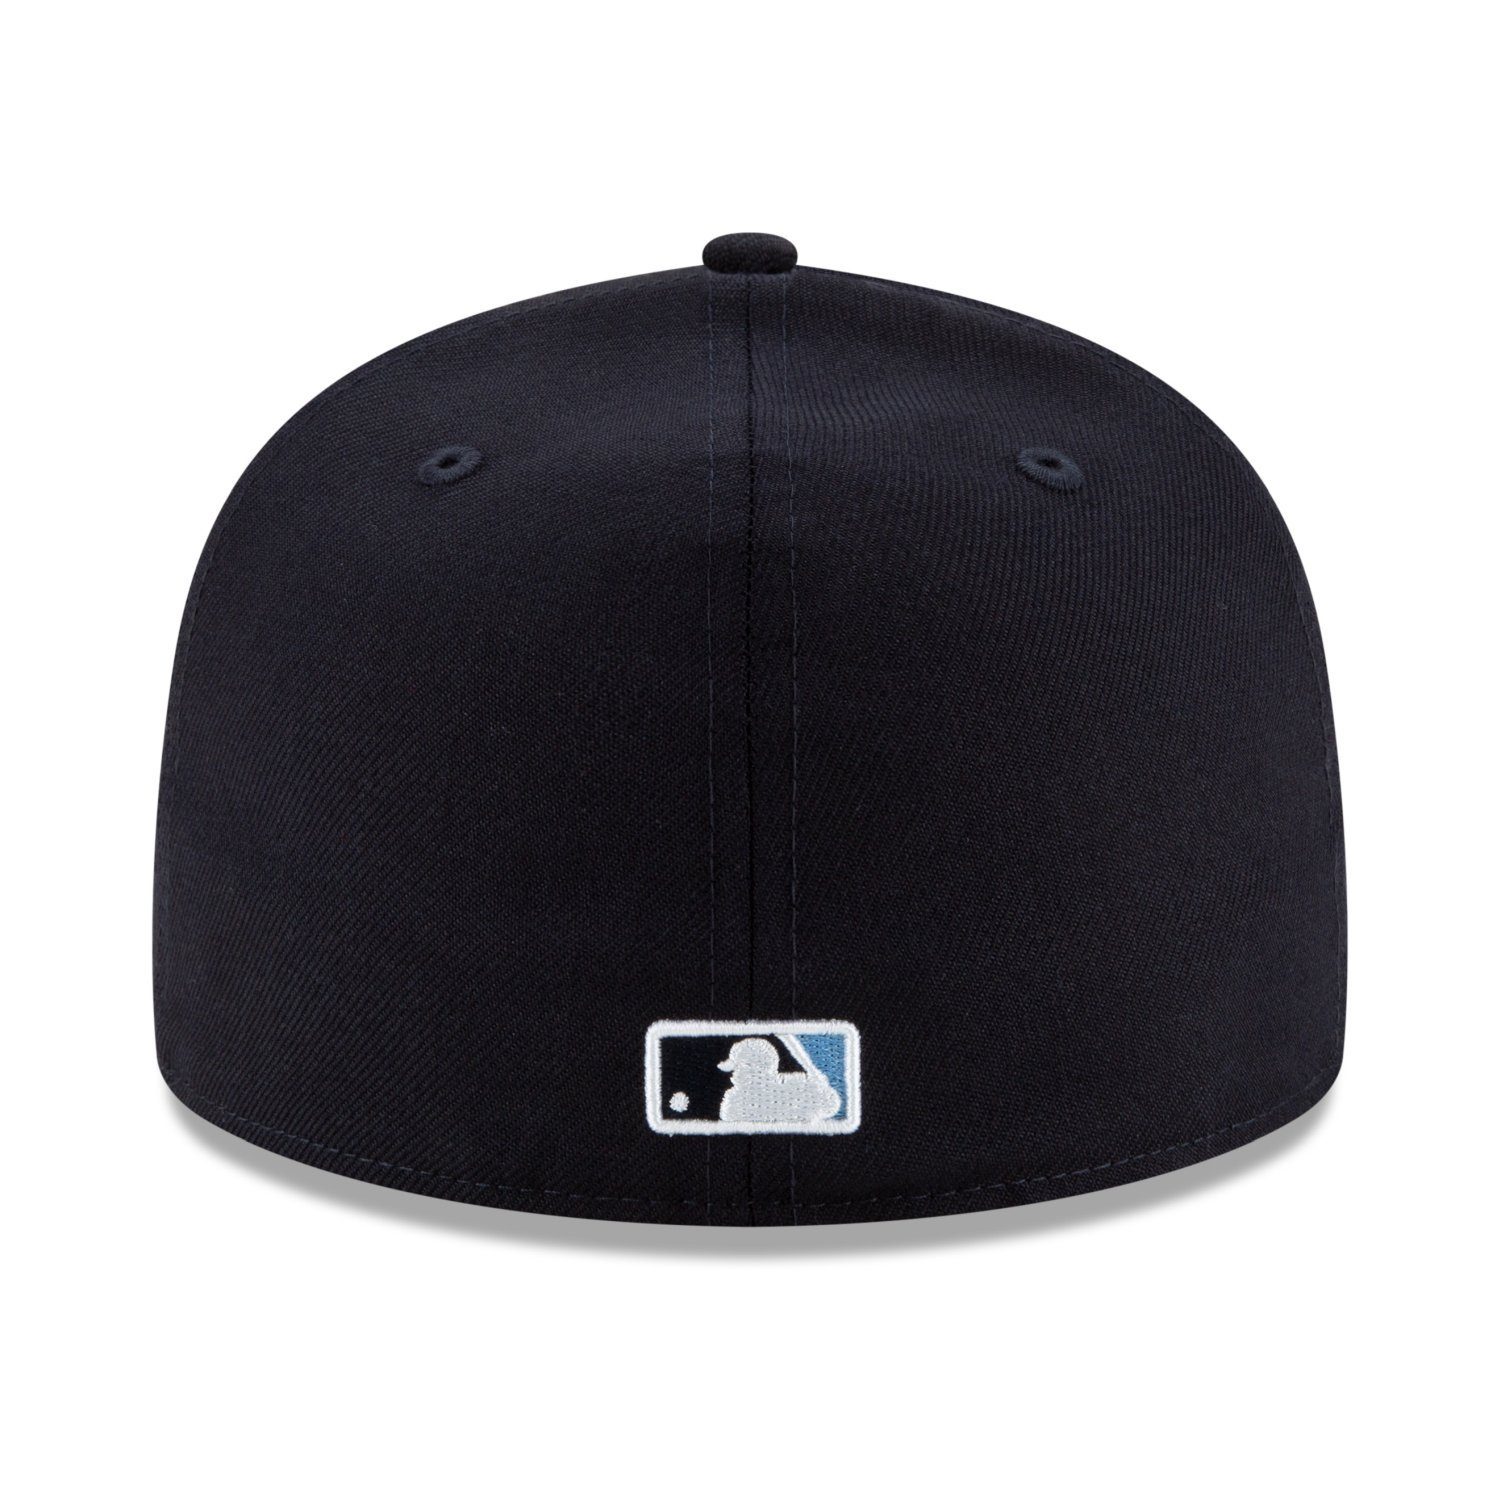 York 59Fifty LIFESTYLE New New Era Fitted Cap Yankees